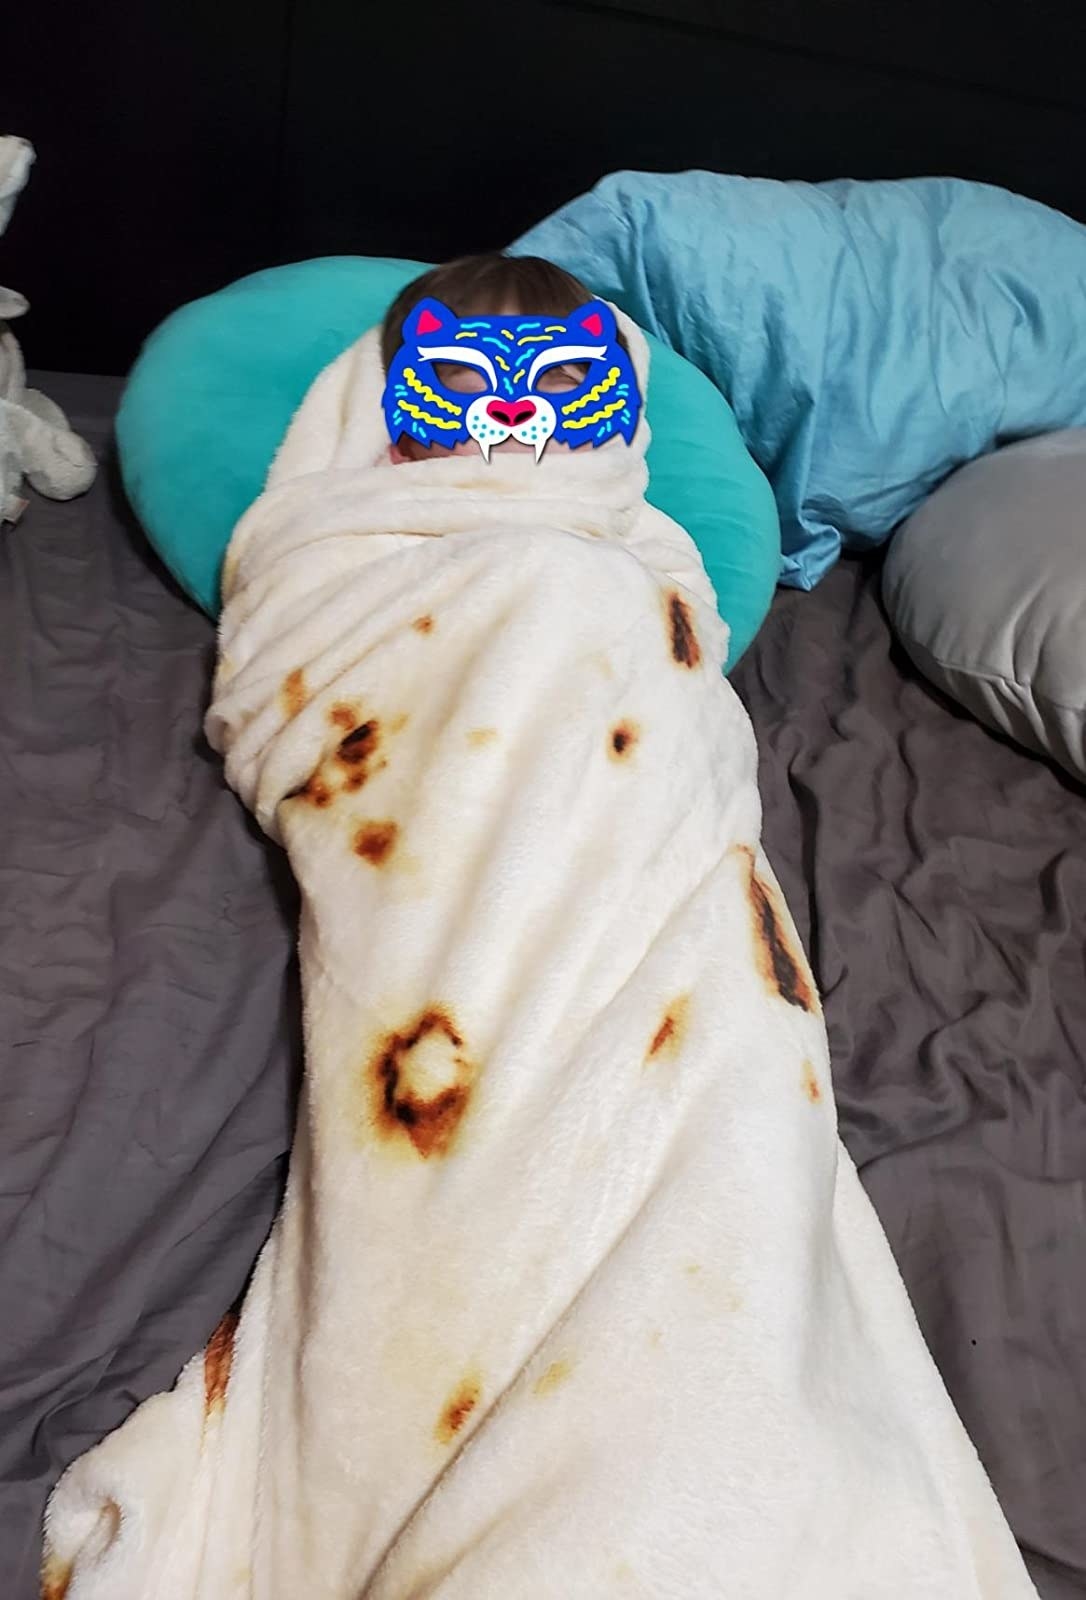 Reviewer's photo showing their child wrapped like a burrito in the tortilla blanket